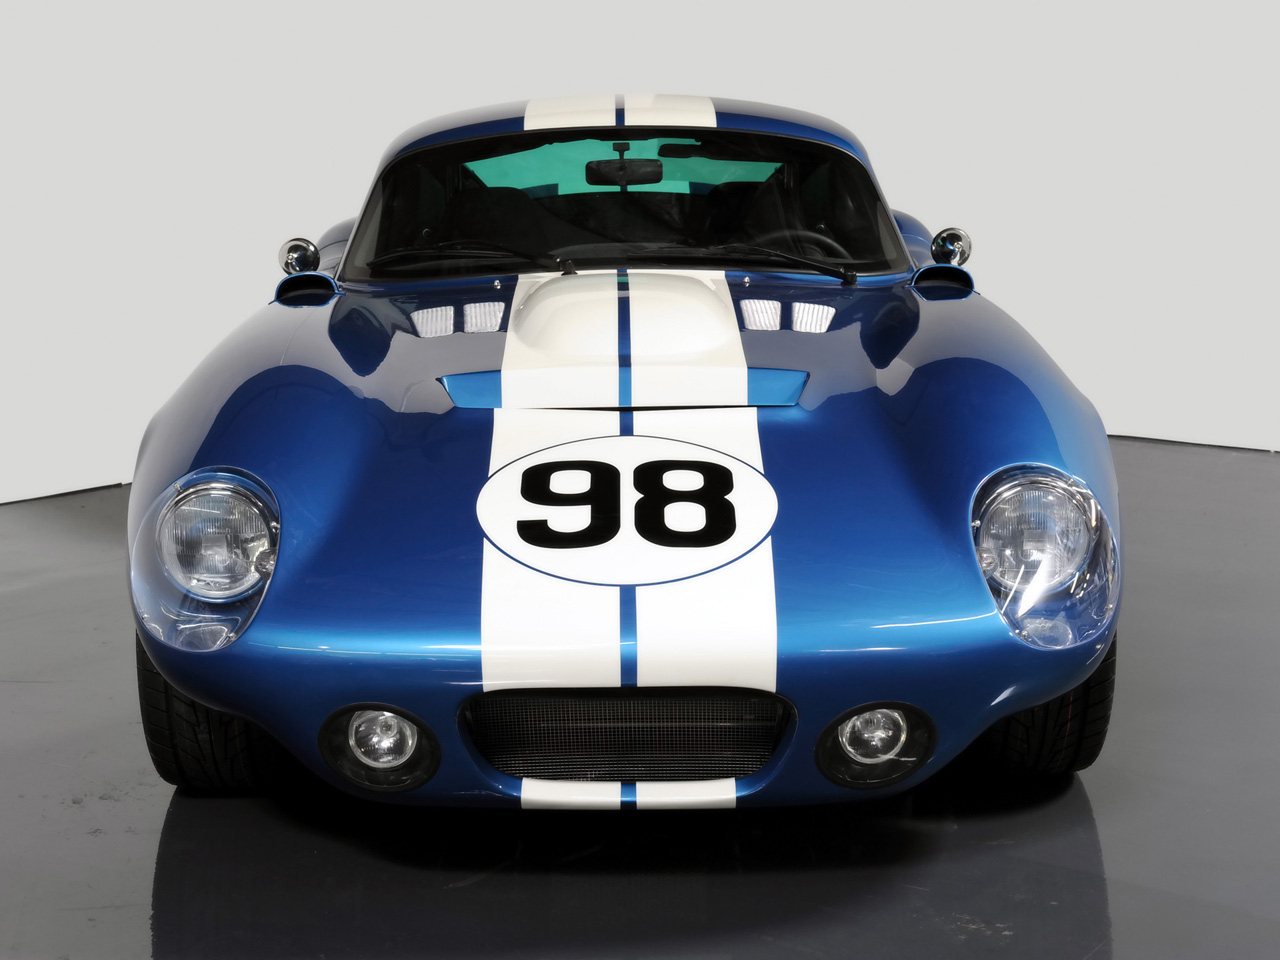 2009 Shelby Cobra Daytona Coupe MKII CSX9000 - Picture 2 of 5 ...